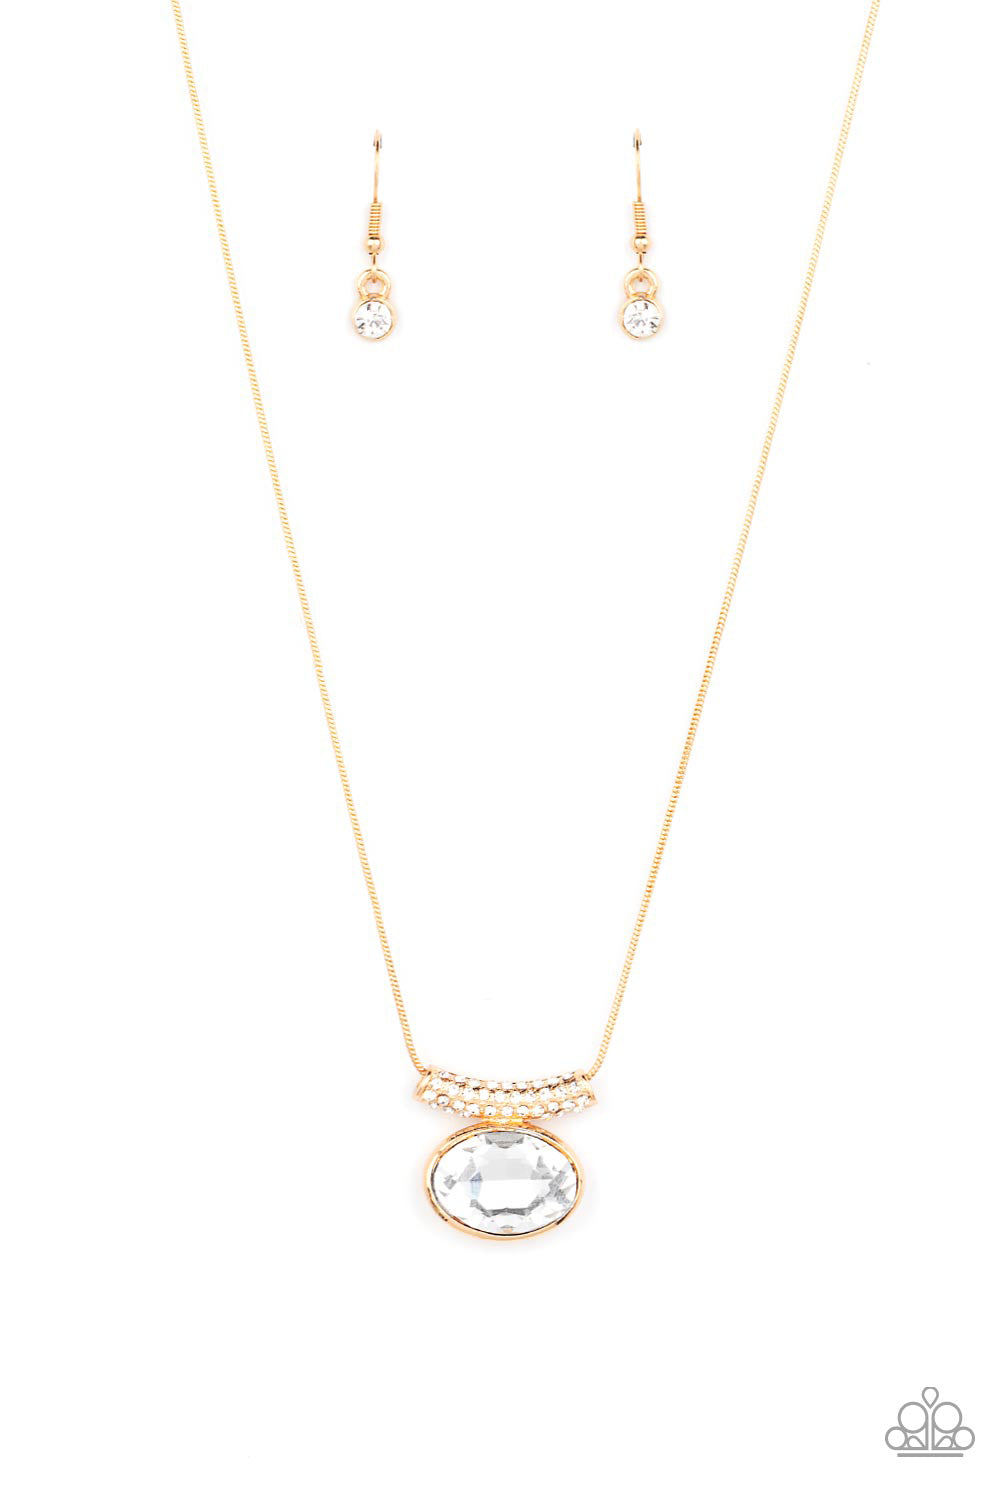 Pristinely Prestigious - Gold Snake Chain & Oval White Gem Pendant Paparazzi Necklace & matching earrings